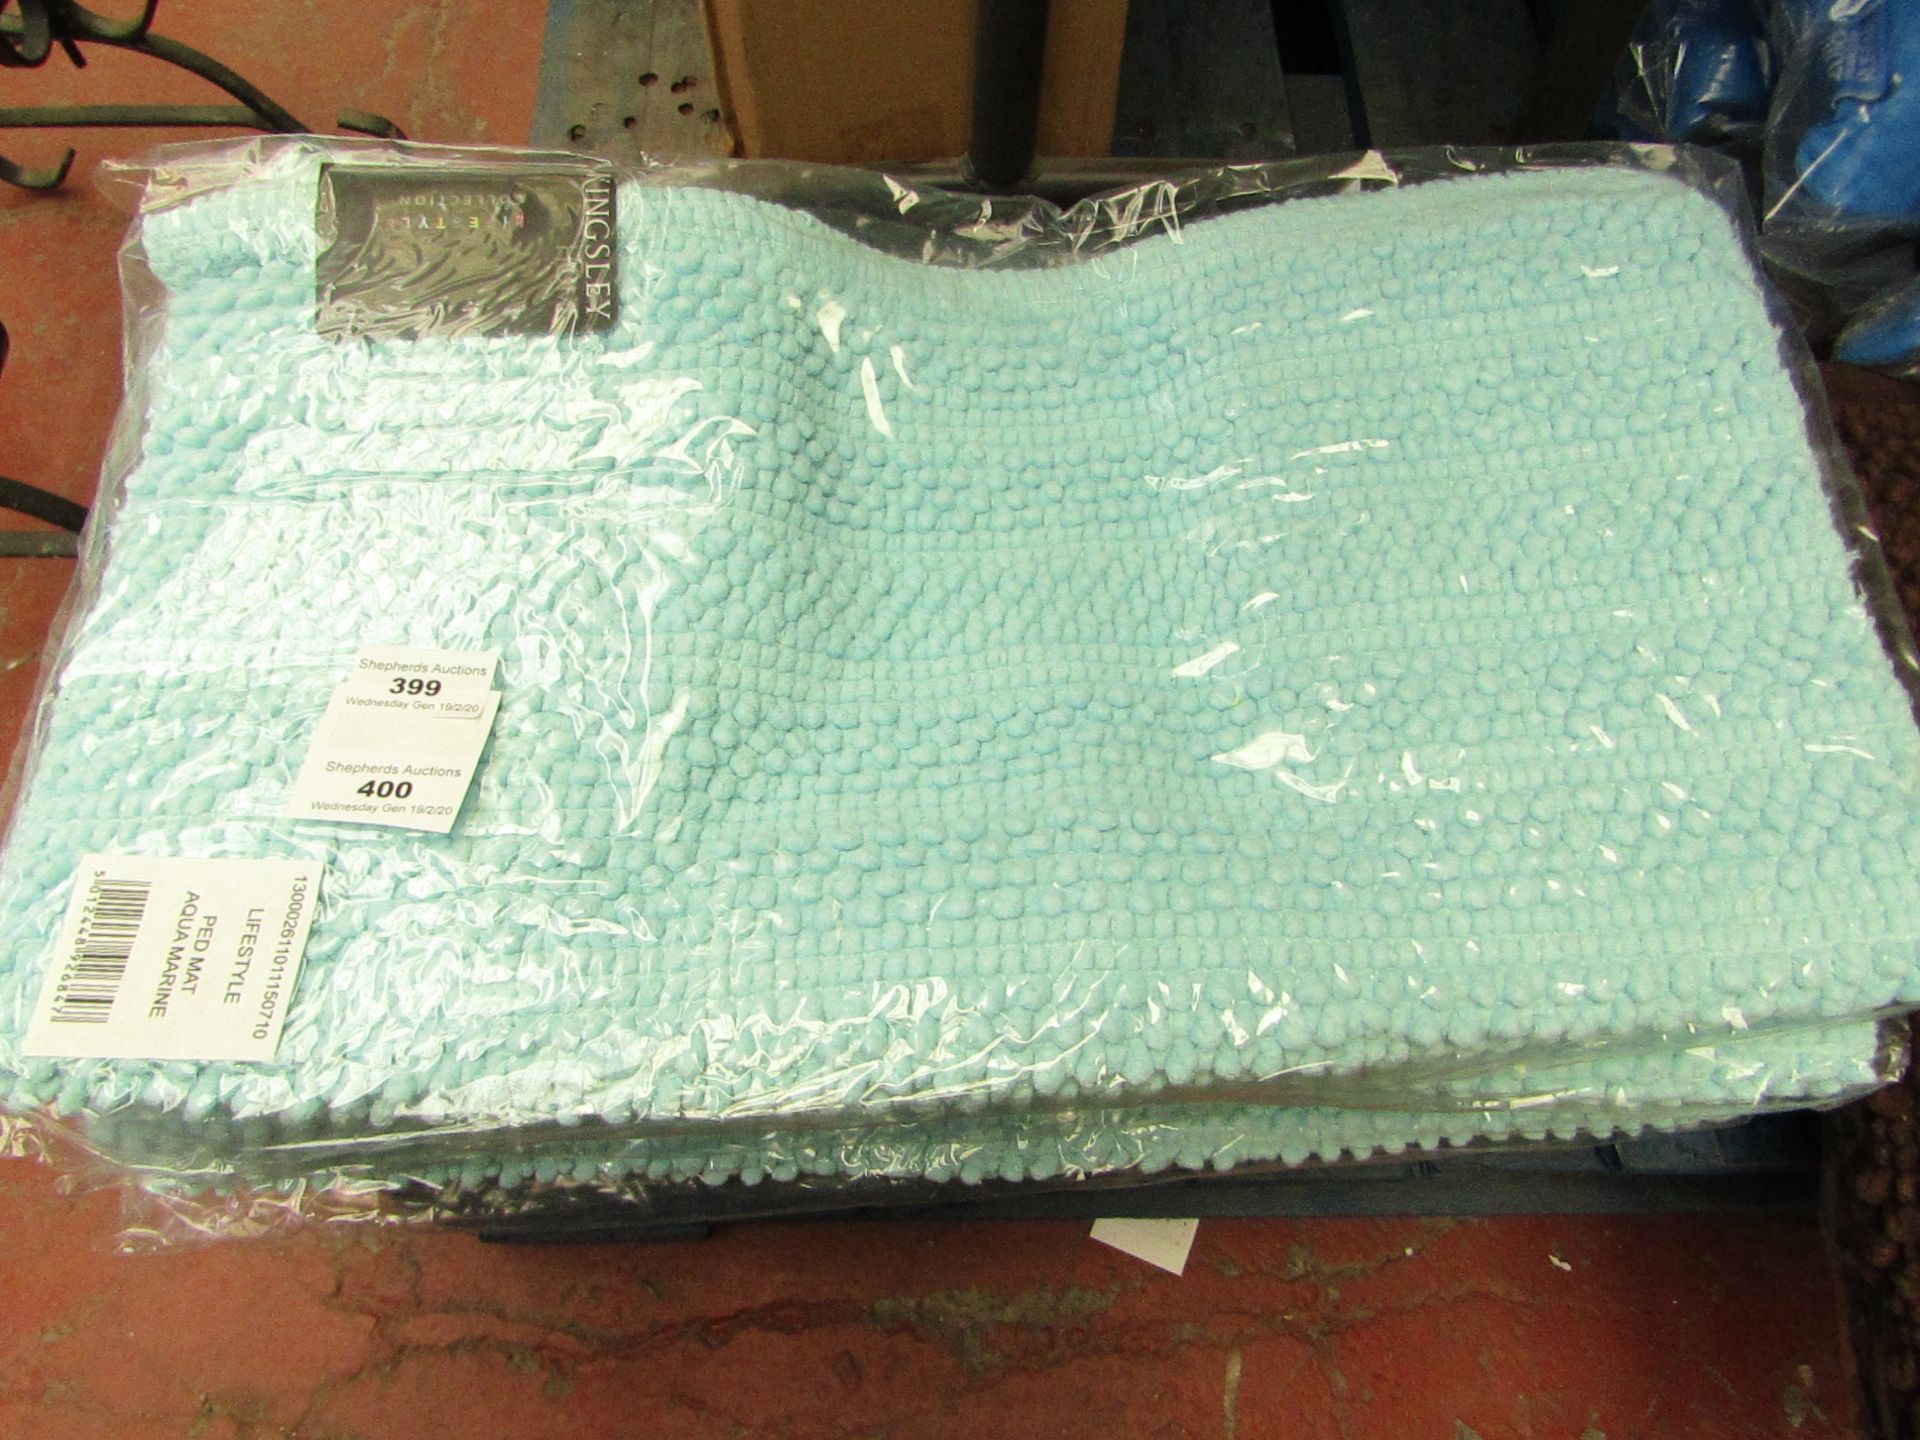 2x Kingsley pedestal mats, new and packaged.